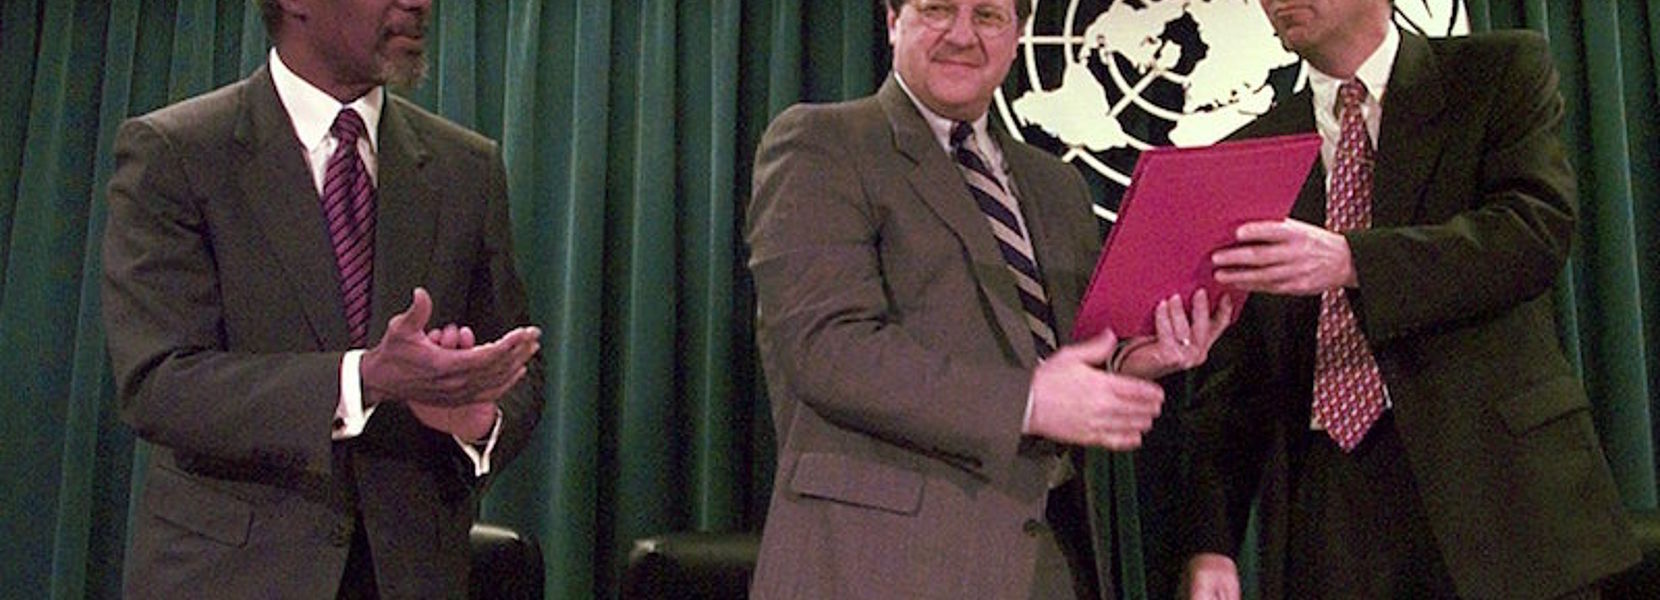 Minister of Foreign Affairs of Canada, Lloyd Axworthy, center, and Foreign Minister of Norway Bjorn Tore Godal, right, hold the document produced at the Oslo Conference calling for a total ban on anti-personnel land mines at the United Nations Friday, Sept. 26, 1997. U.N. Secretary-General Kofi Annan, left, applauds. (AP Photo/Adam Nadel)